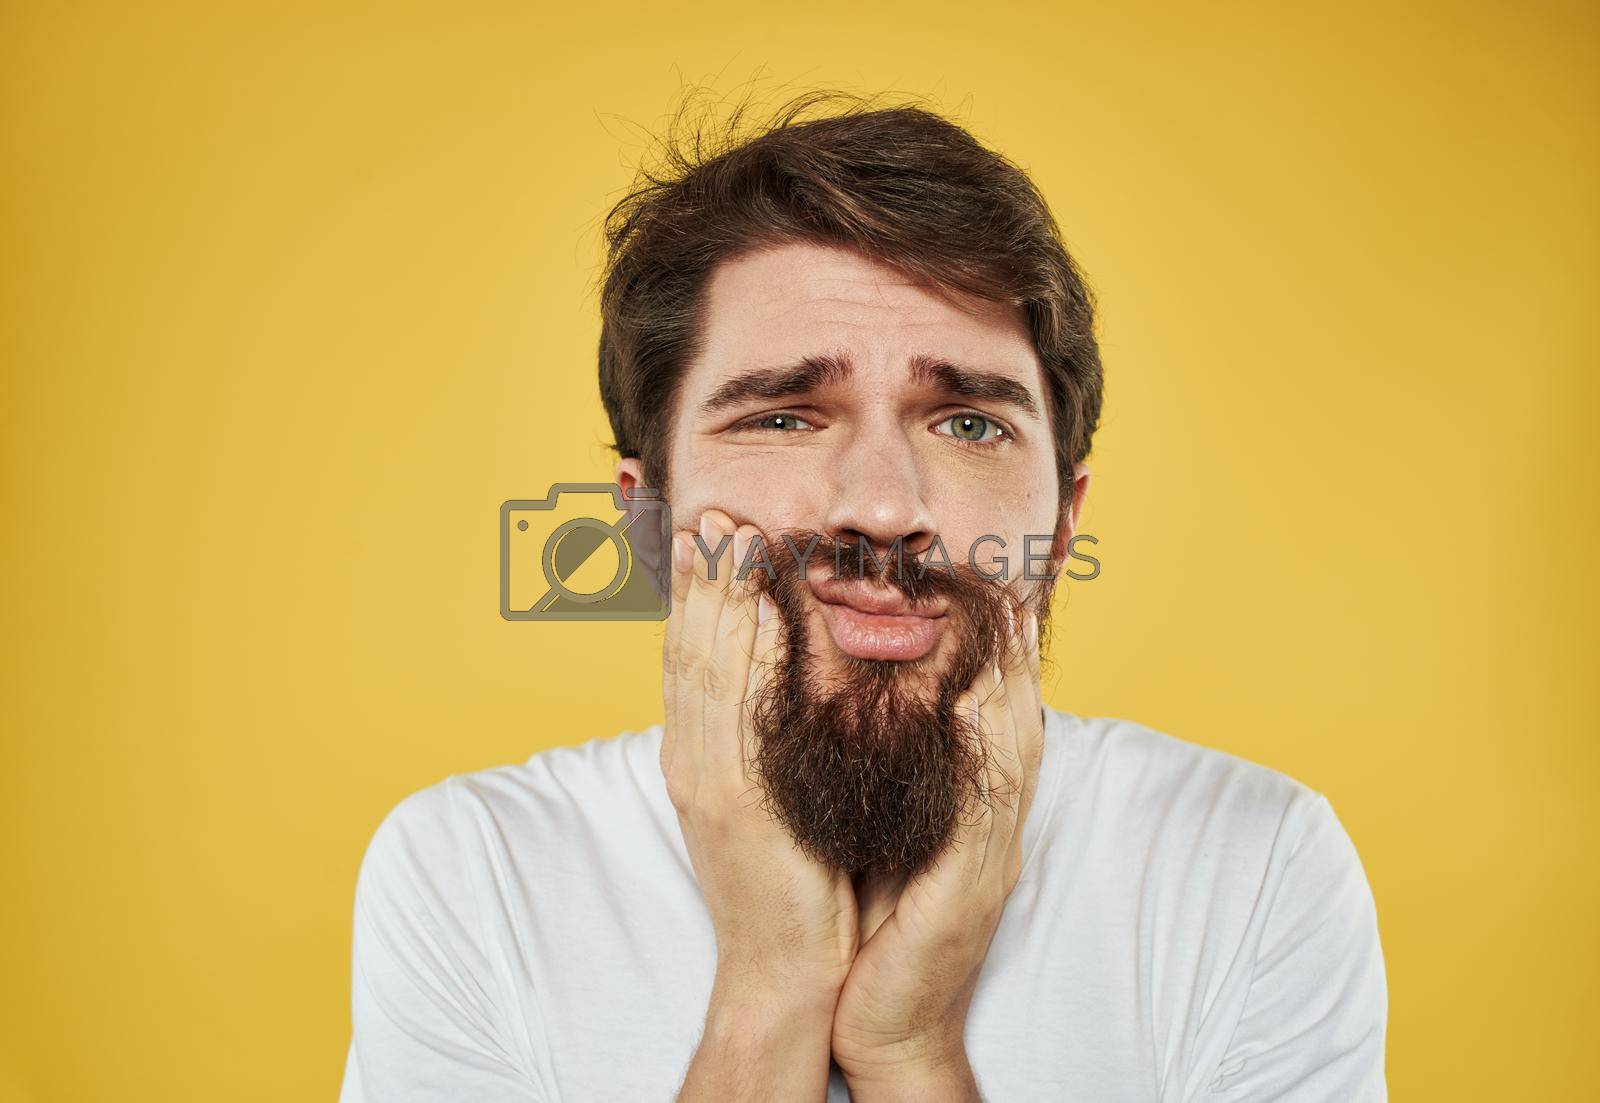 Royalty free image of Frightened sad man touching face with hands on yellow background cropped view by SHOTPRIME